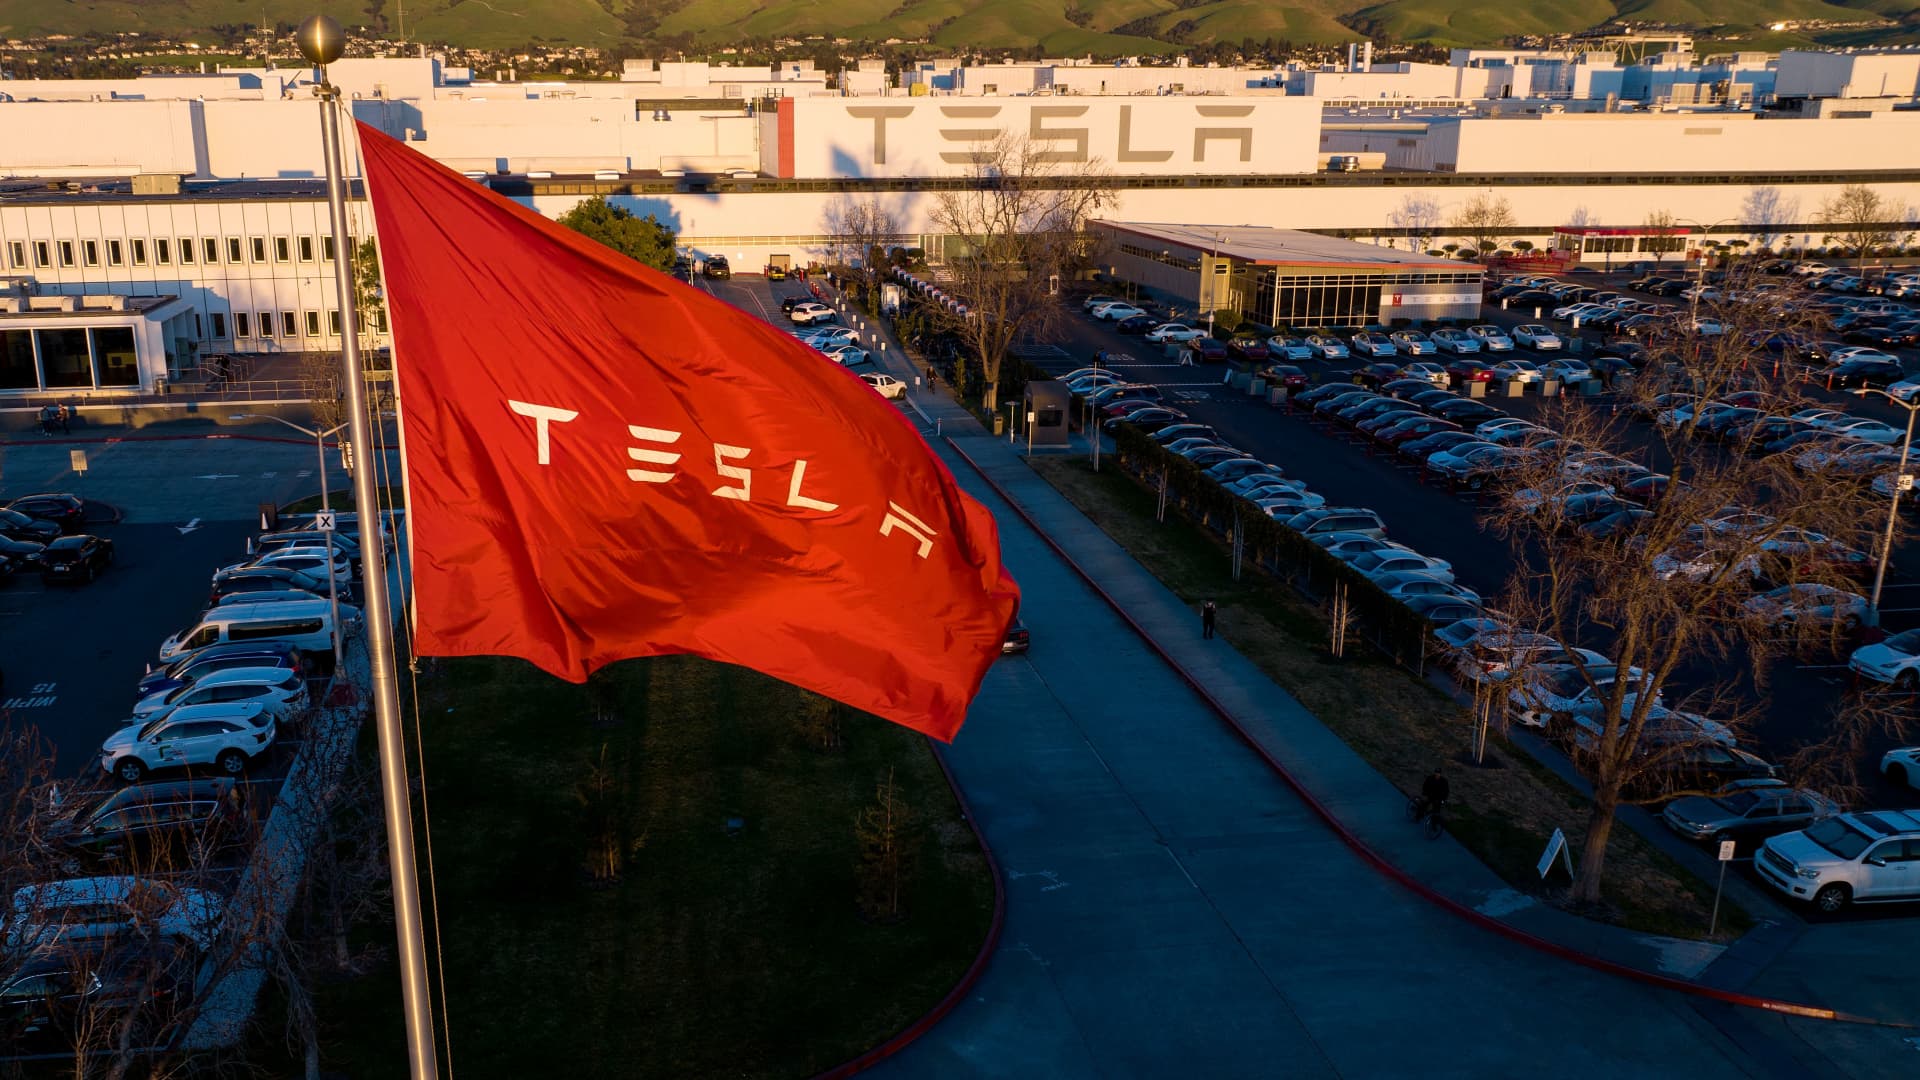 Tesla paid PR firm to surveil employees on Facebook in 2017 union push